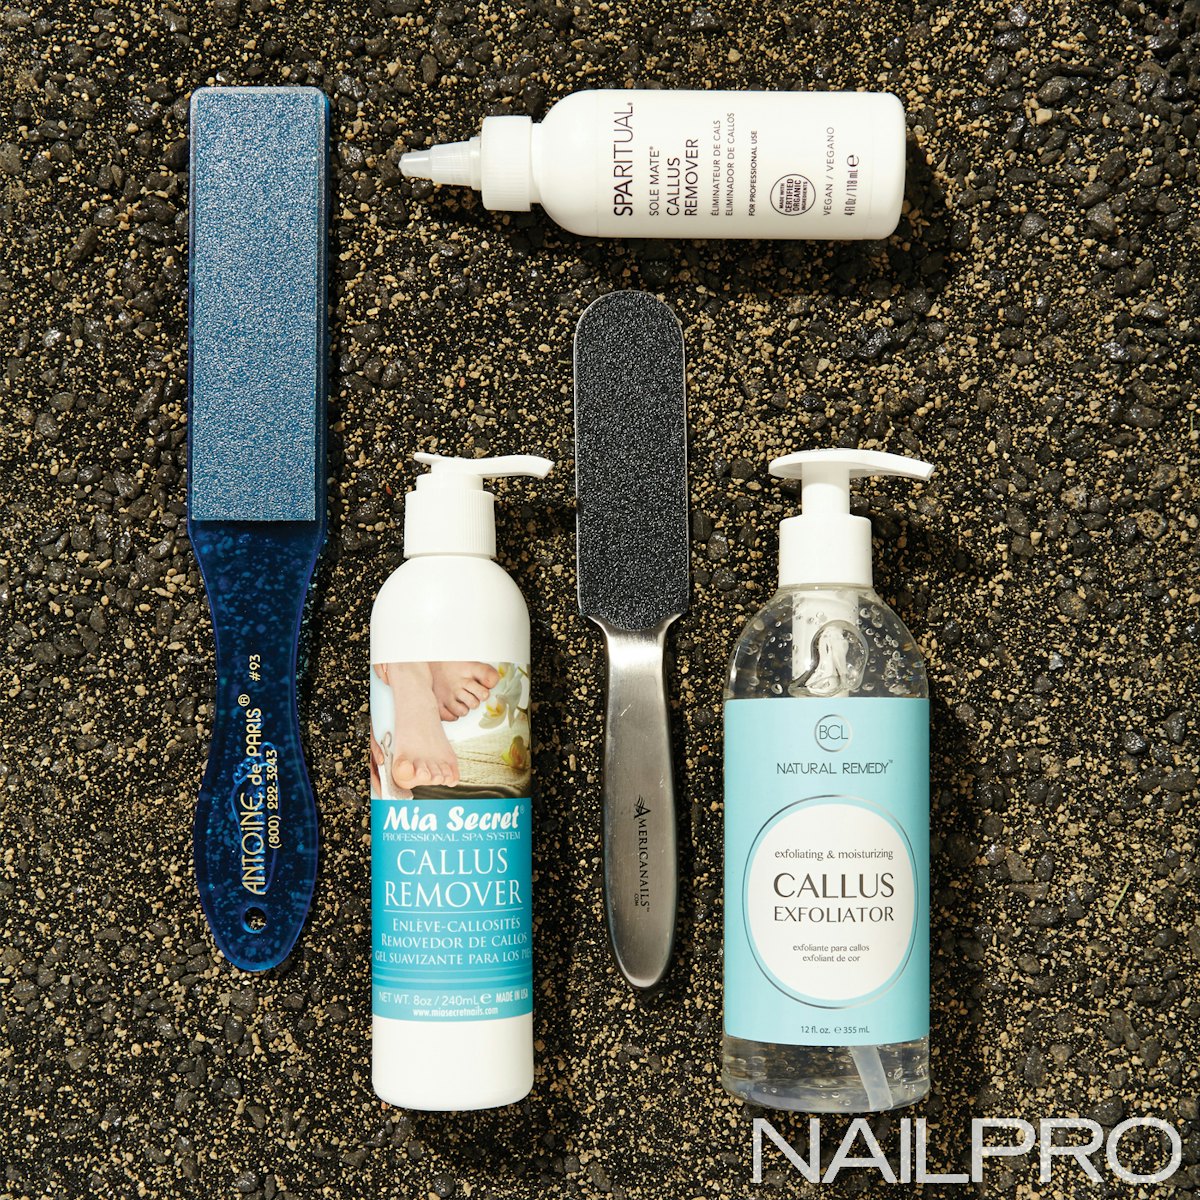 https://img.nailpro.com/files/base/allured/all/image/2017/05/np.callus-care-5.png?auto=format%2Ccompress&fit=max&q=70&w=1200